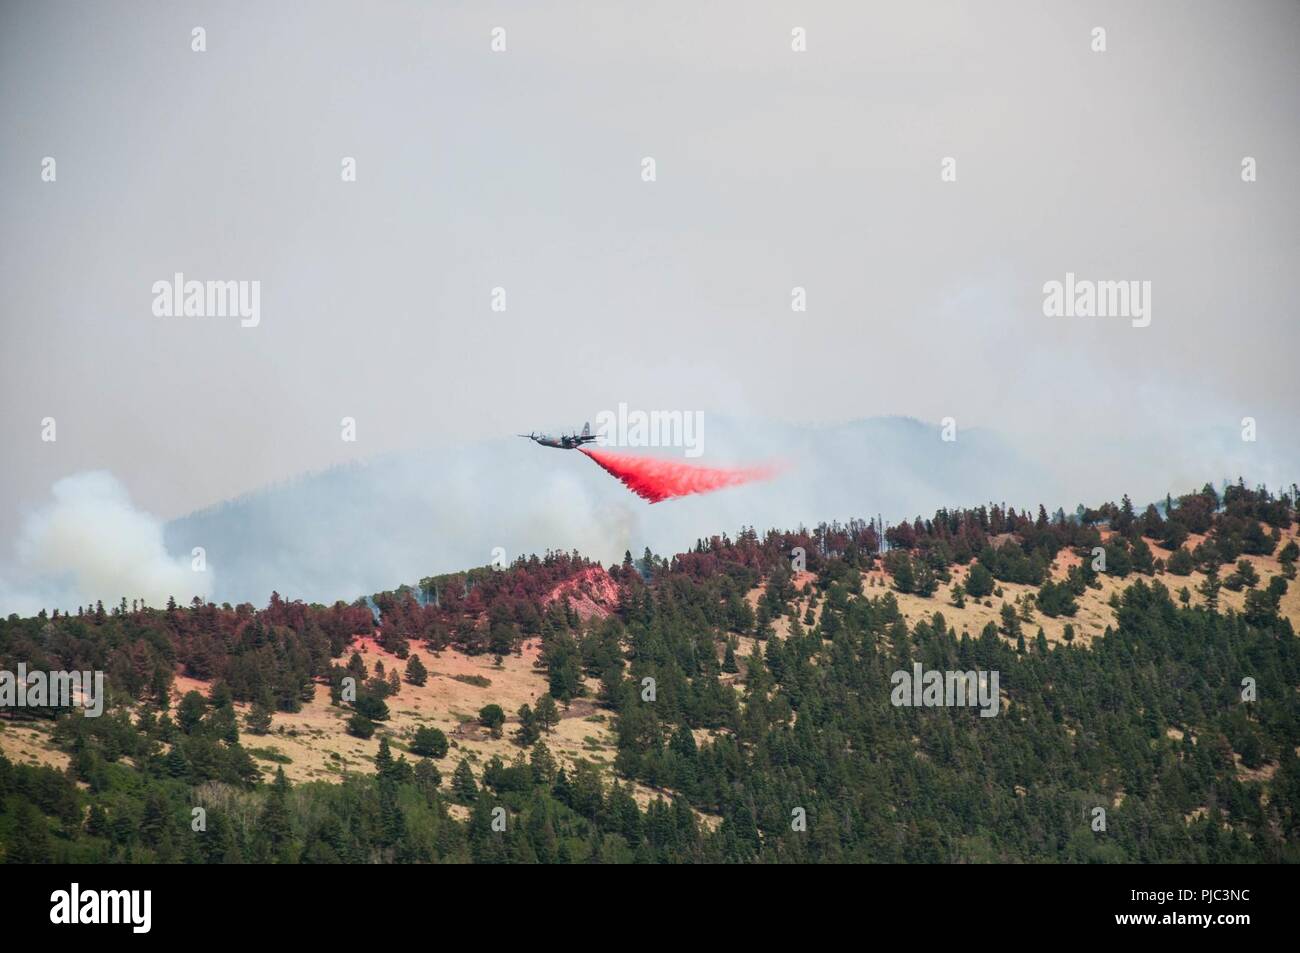 An Air Force C-130 Hercules aircraft, equipped with a Modular Airborne Firefighting System, drops slurry to support fire suppression efforts July 4, 2018. The mission is provided by the Department of Defense at the request of the U.S. Forest Service, which owns the MAFFS equipment and provides the slurry. Stock Photo